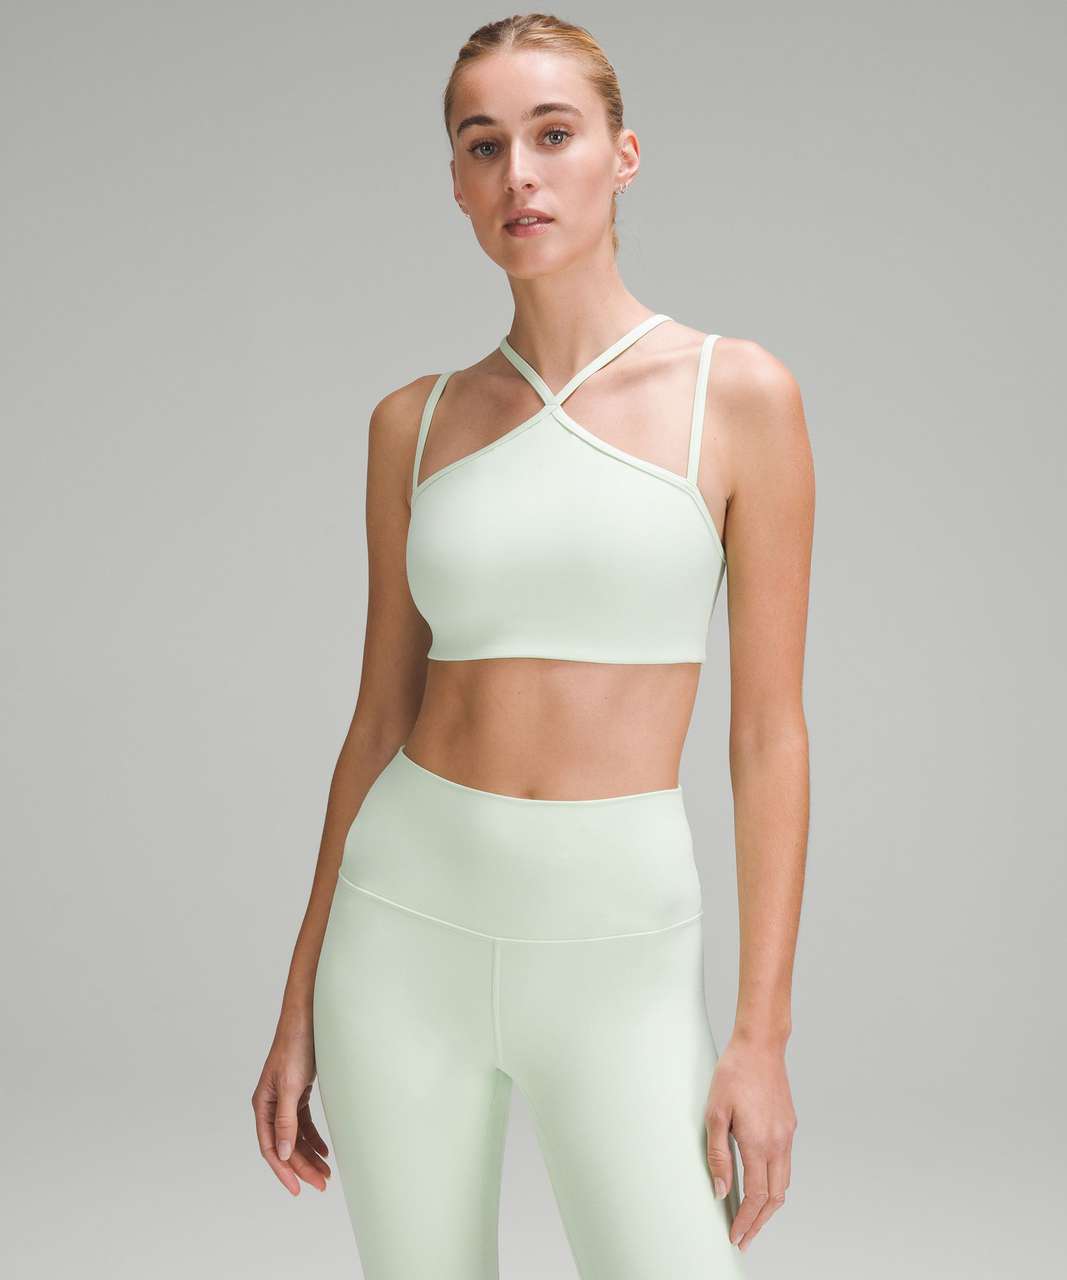 Lululemon Flow Y Strappy Bra Nulu Light Support, A–C Cups, Women's Fashion,  Activewear on Carousell